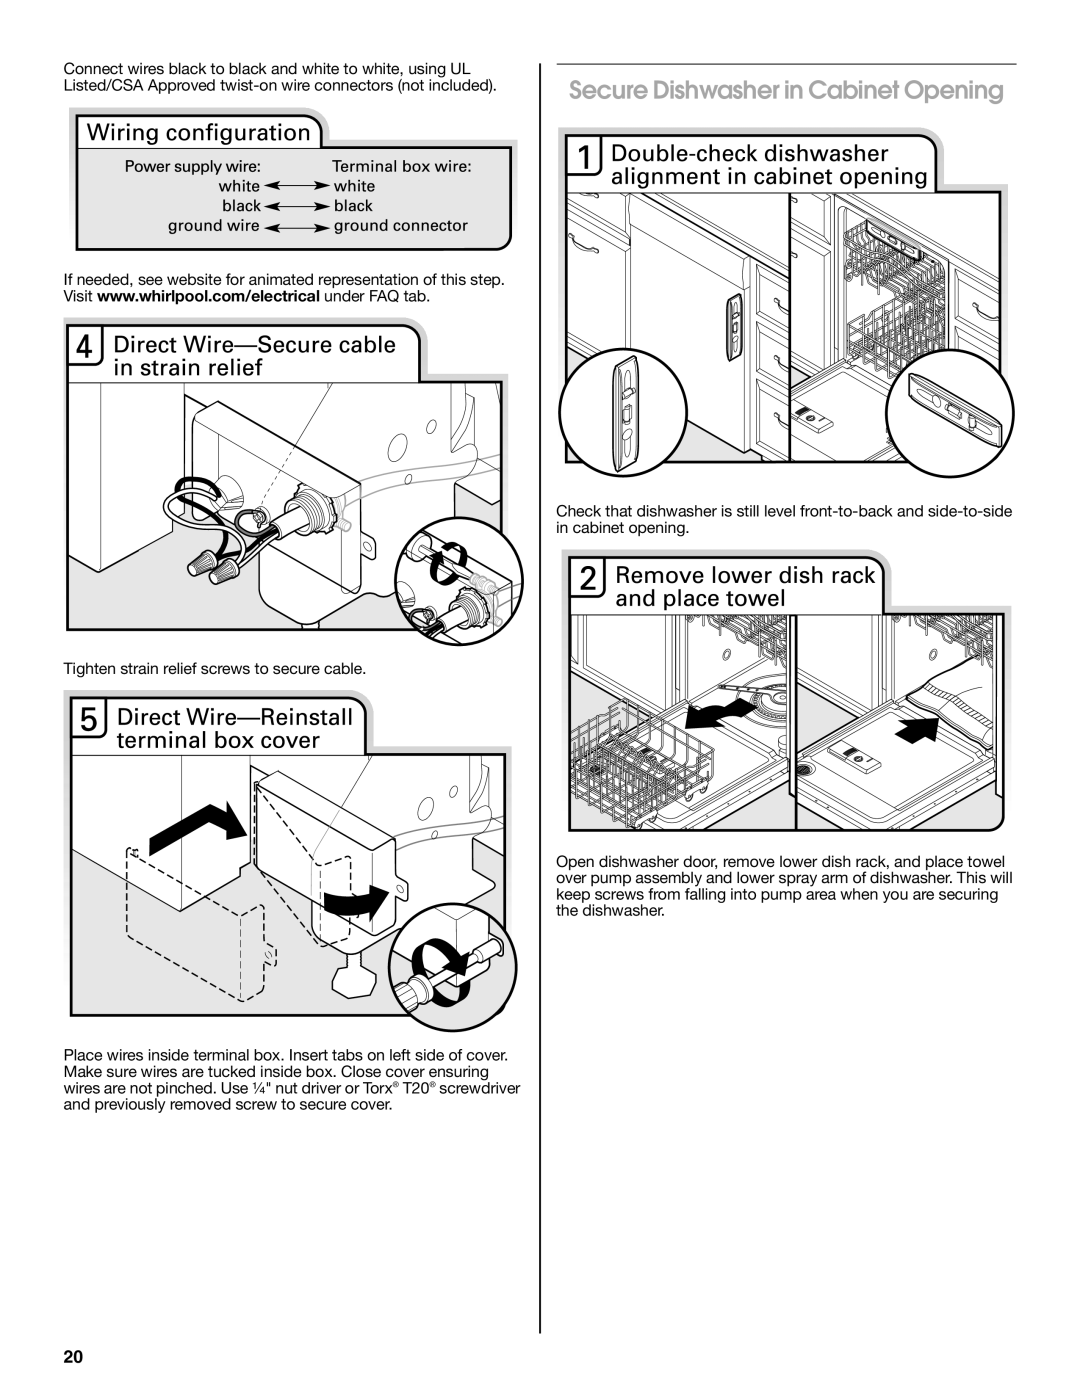 Whirlpool W10435039A installation instructions Secure Dishwasher in Cabinet Opening 